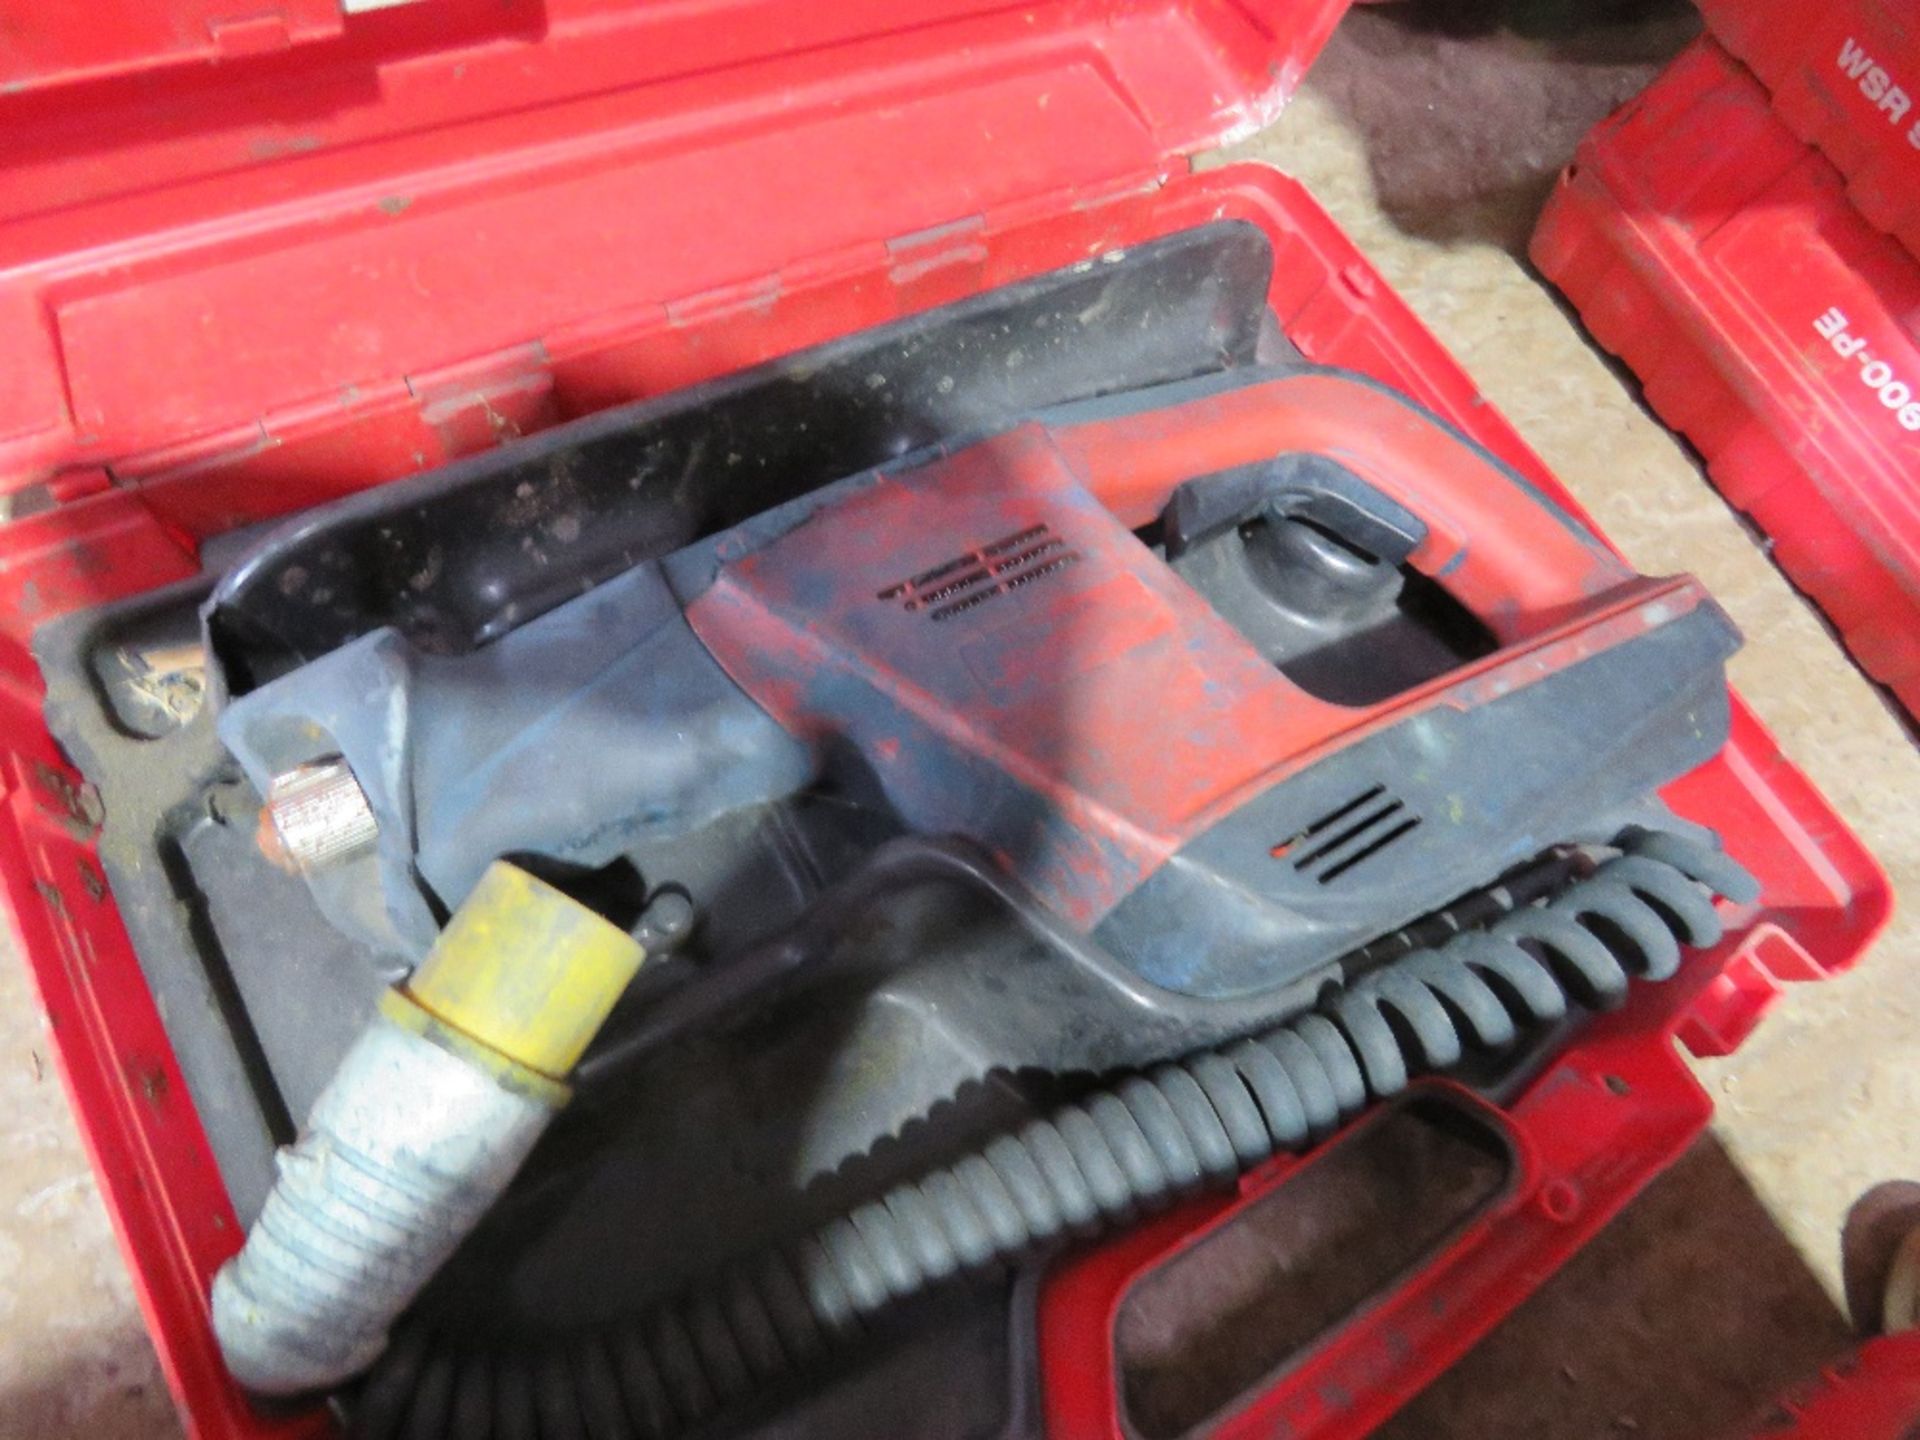 2 X HILTI 110VOLT POWERED RECIPROCATING SAWS. - Image 2 of 2